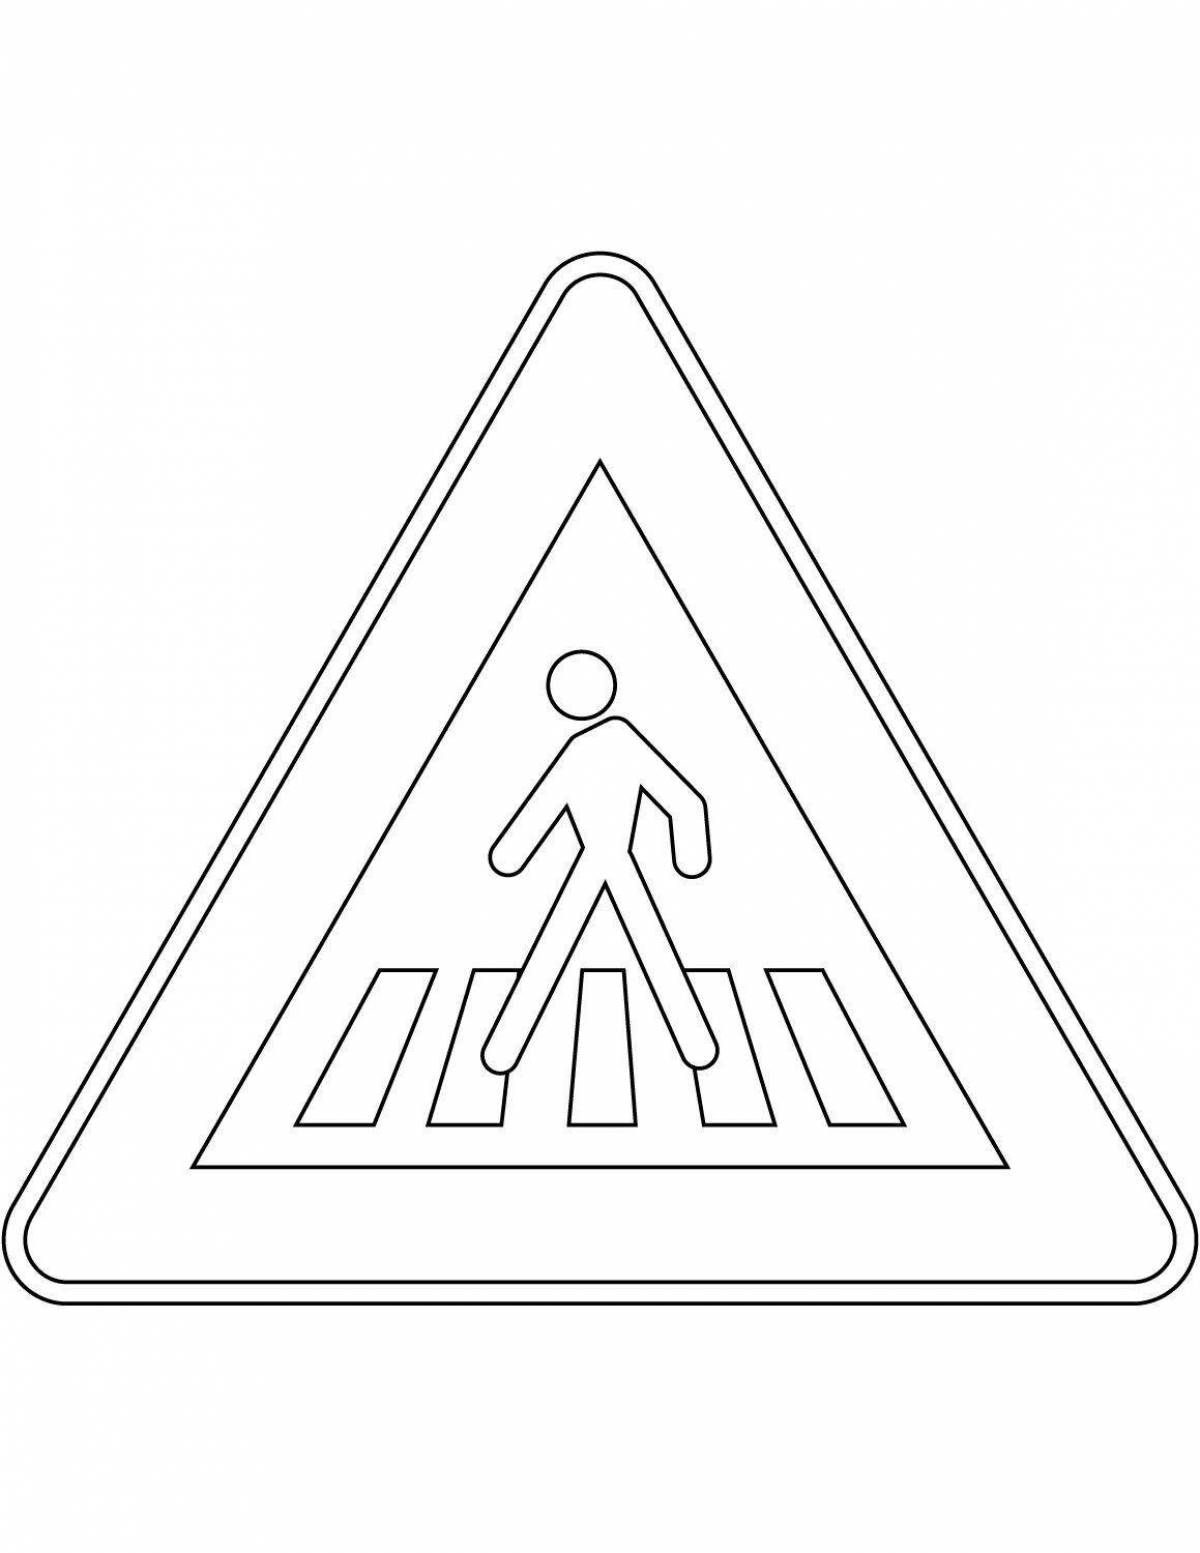 Coloring page bold footpath sign